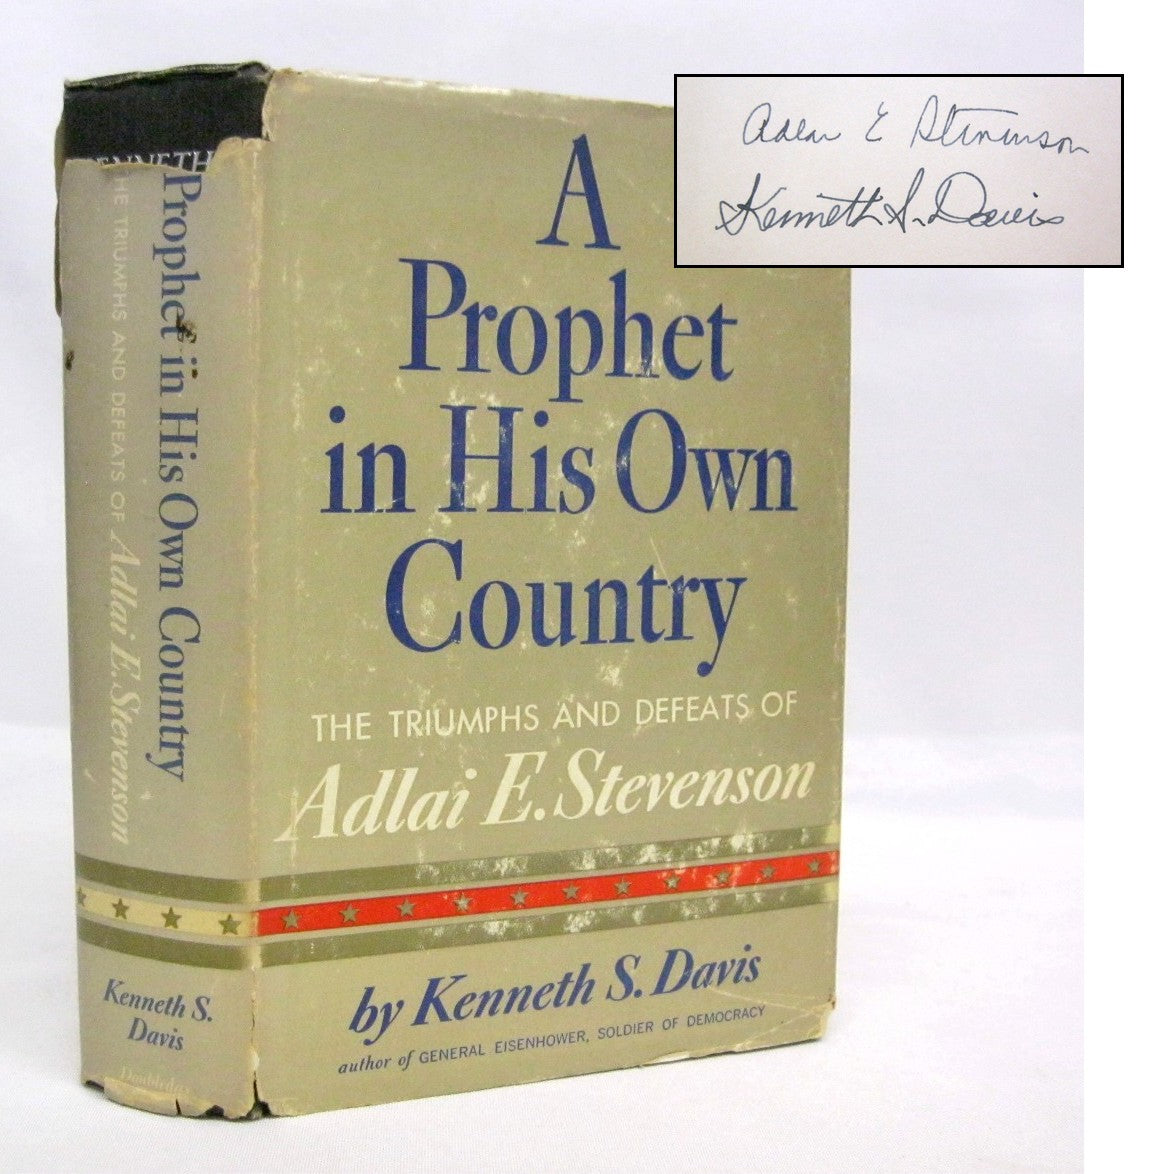 A Prophet in His Own Country: The Triumphs and Defeats of Adlai E. Stevenson by Kenneth S. Davis